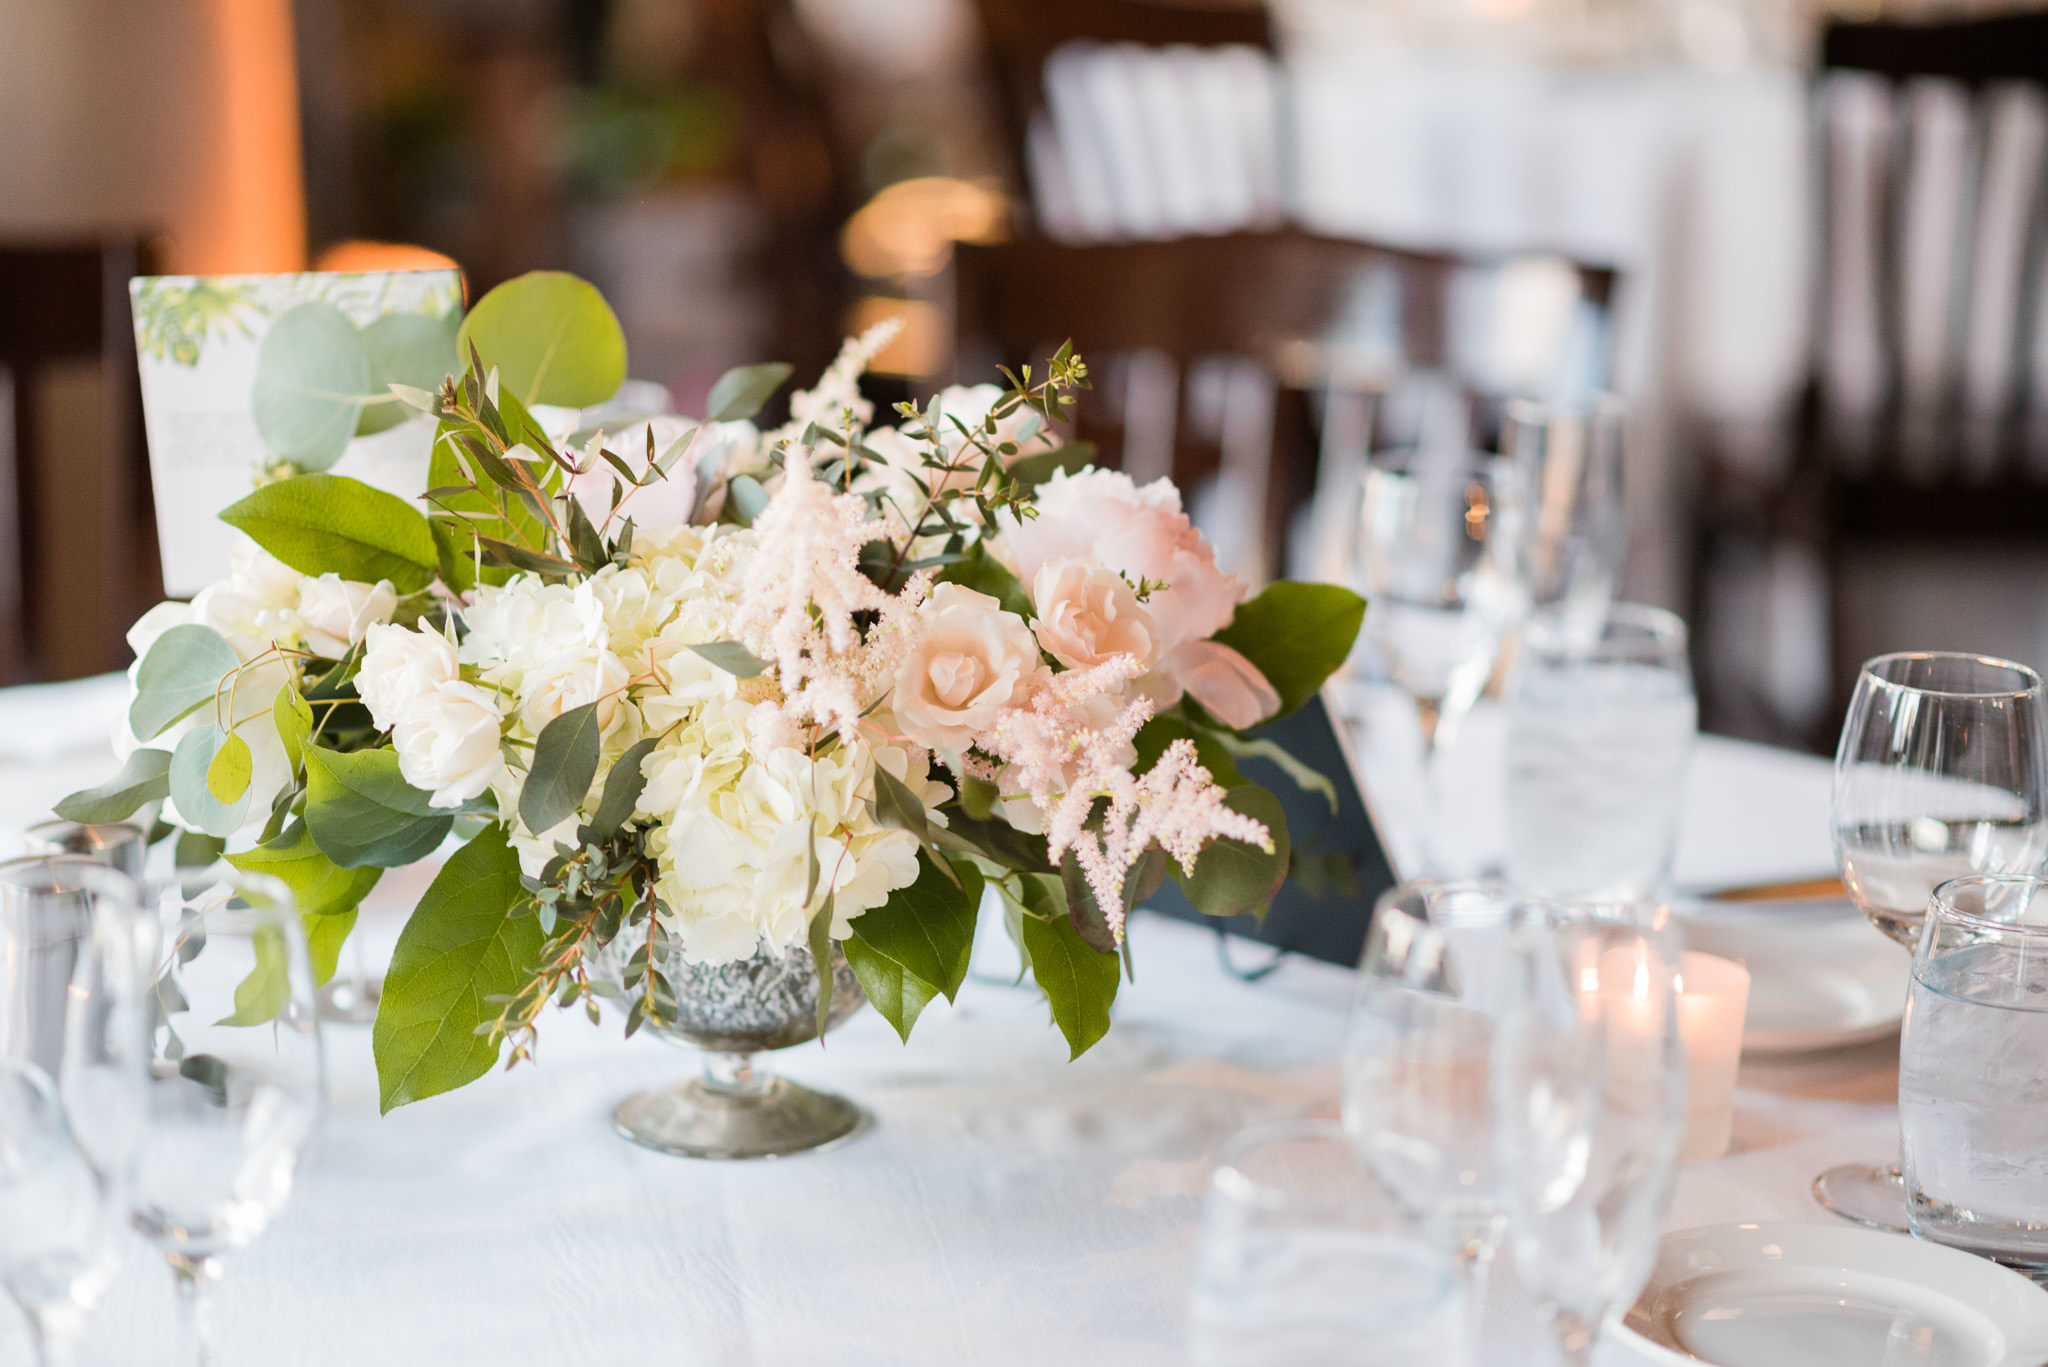 River Roast Chicago spring wedding table arrangements with blush astible, stock, peonies, and eucalyptus. 